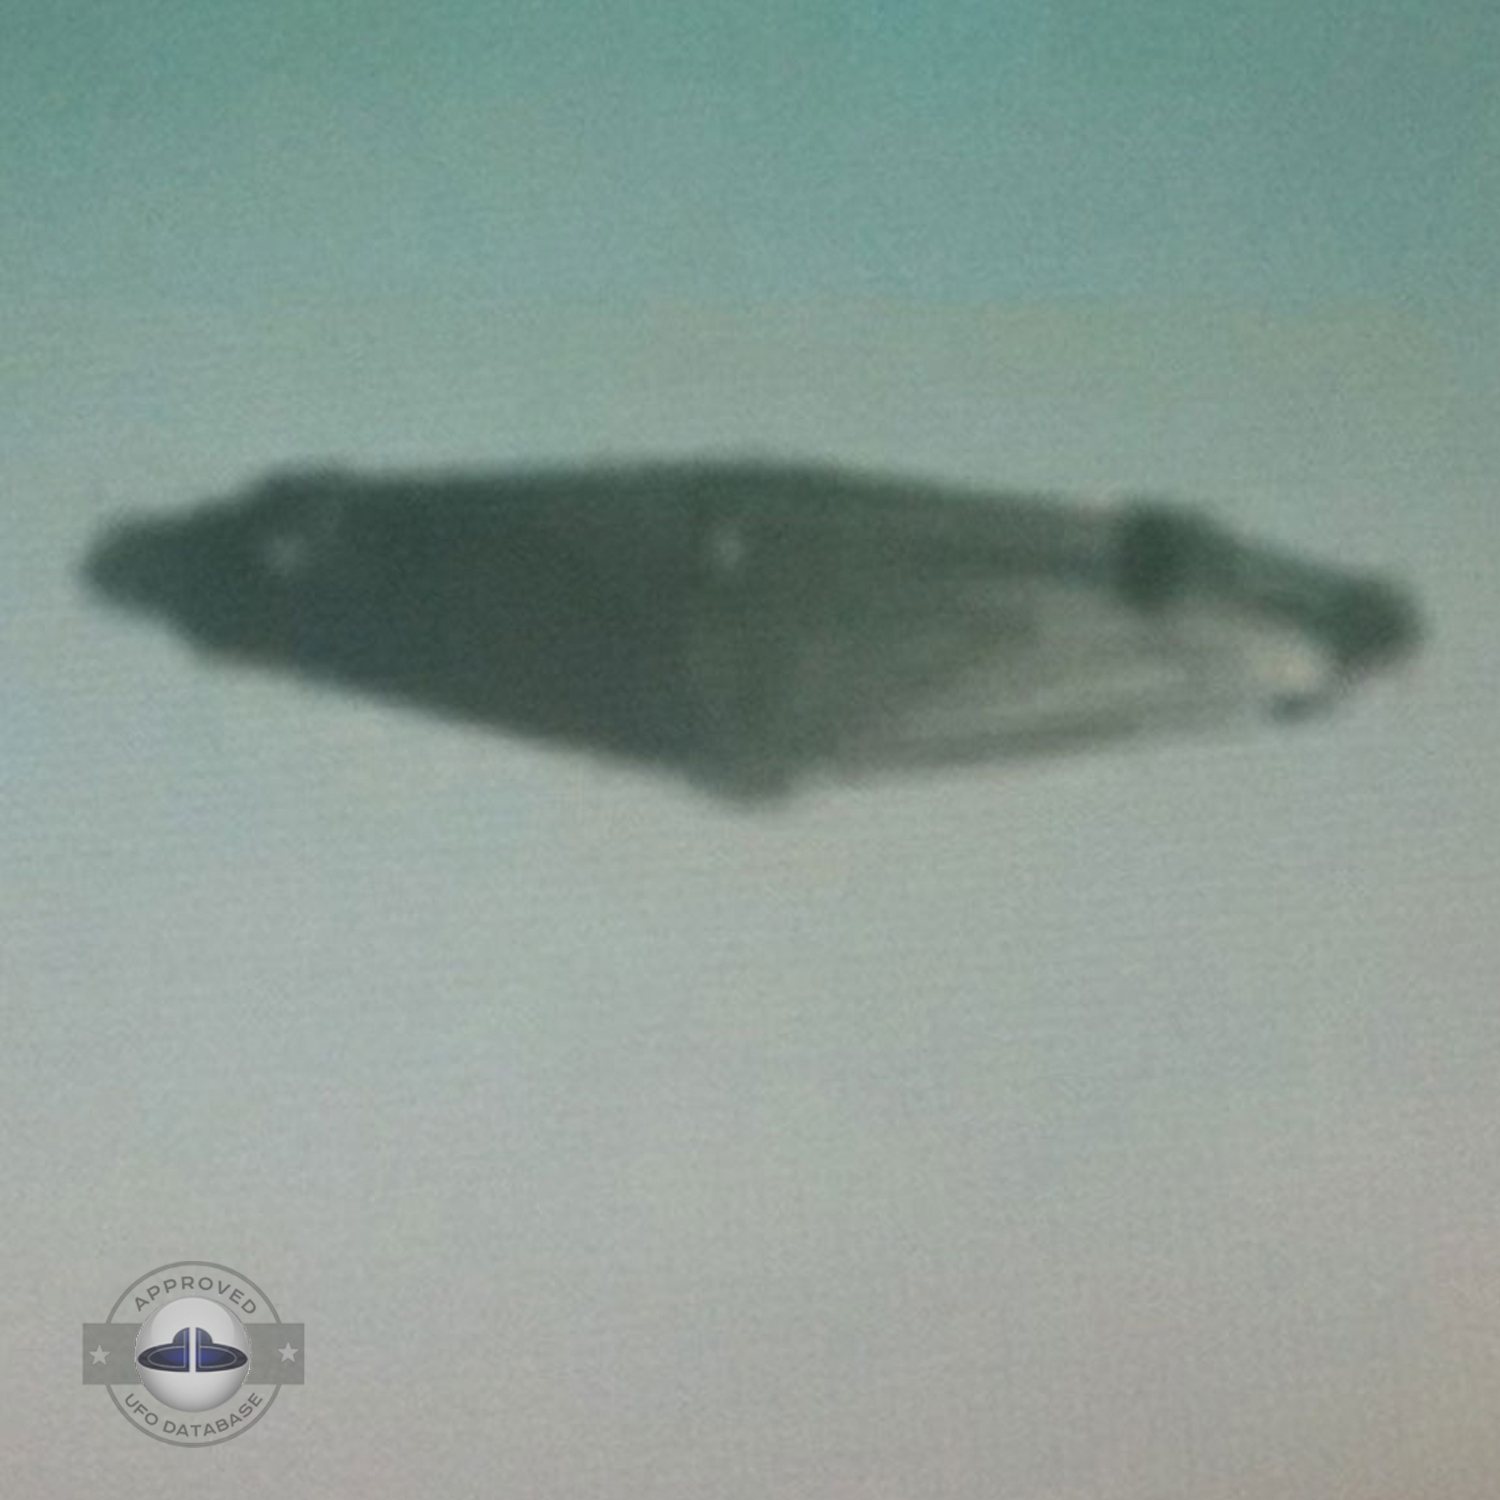 Students saw in amazement the UFO with a metallic flying saucer shape UFO Picture #90-3